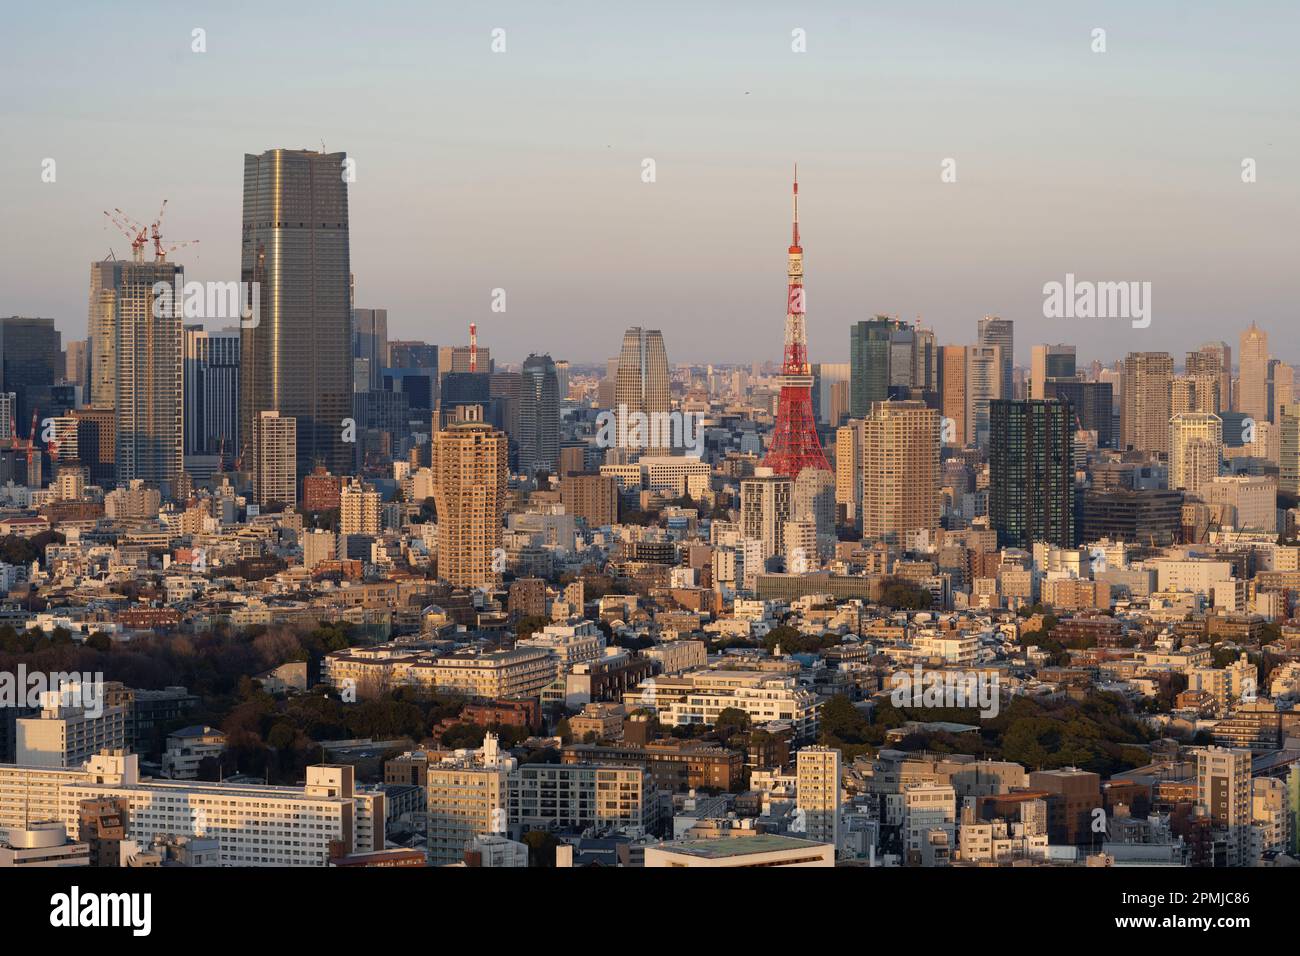 Tokyo, Japan. 9th Feb, 2023. The skyline urban cityscape at sunset viewed  from Ebisu.The population of Tokyo is about 13.9 million people while the  metropolitan area is about 40 million people, making